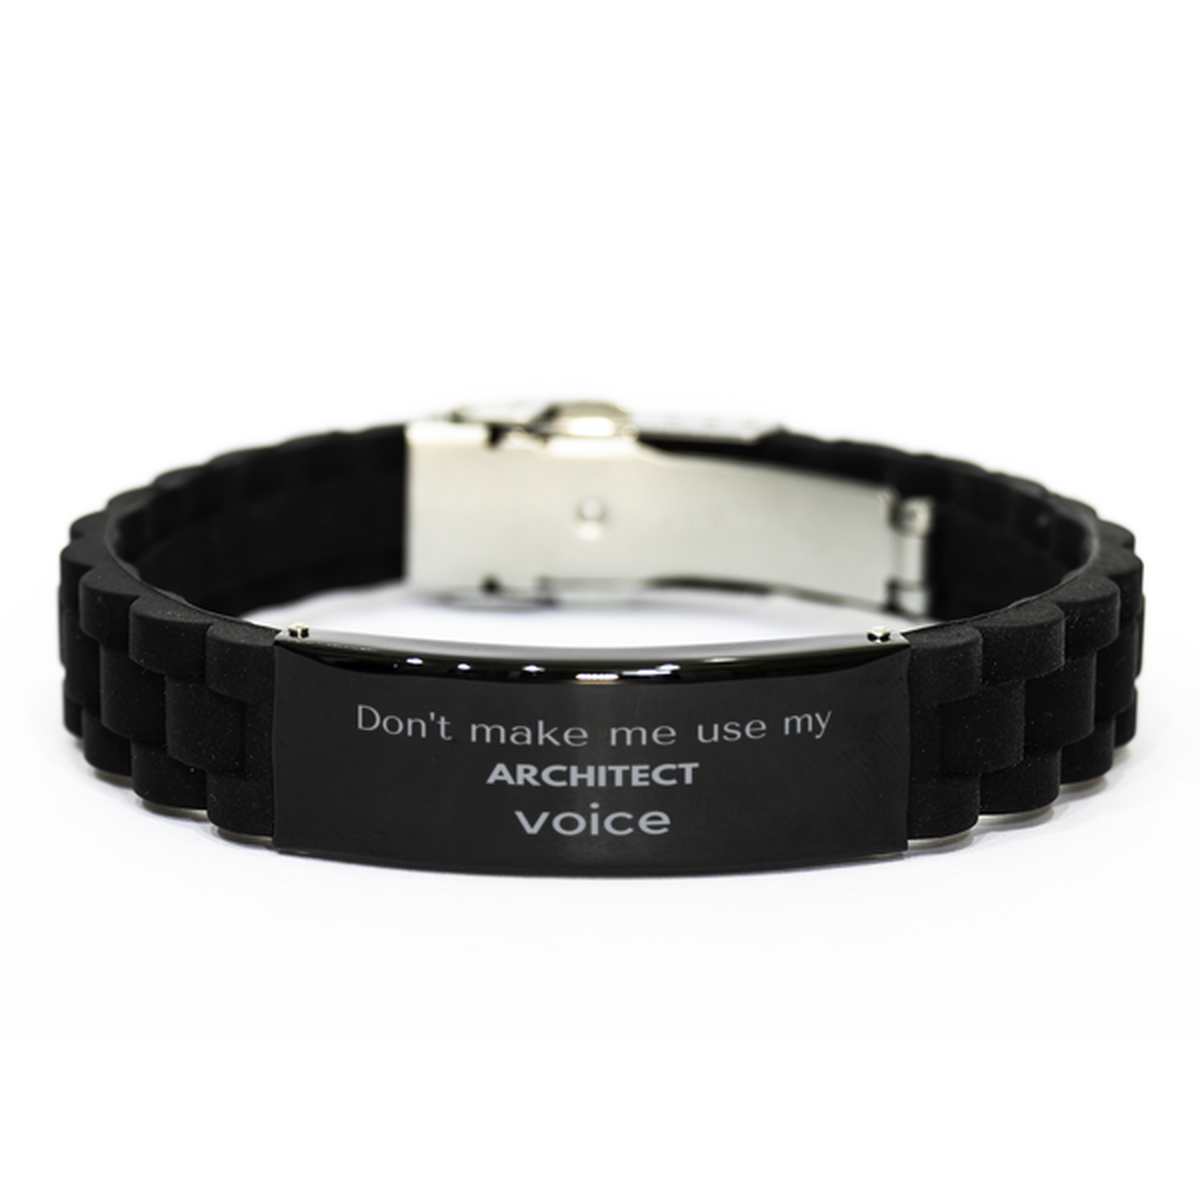 Don't make me use my Architect voice, Sarcasm Architect Gifts, Christmas Architect Black Glidelock Clasp Bracelet Birthday Unique Gifts For Architect Coworkers, Men, Women, Colleague, Friends